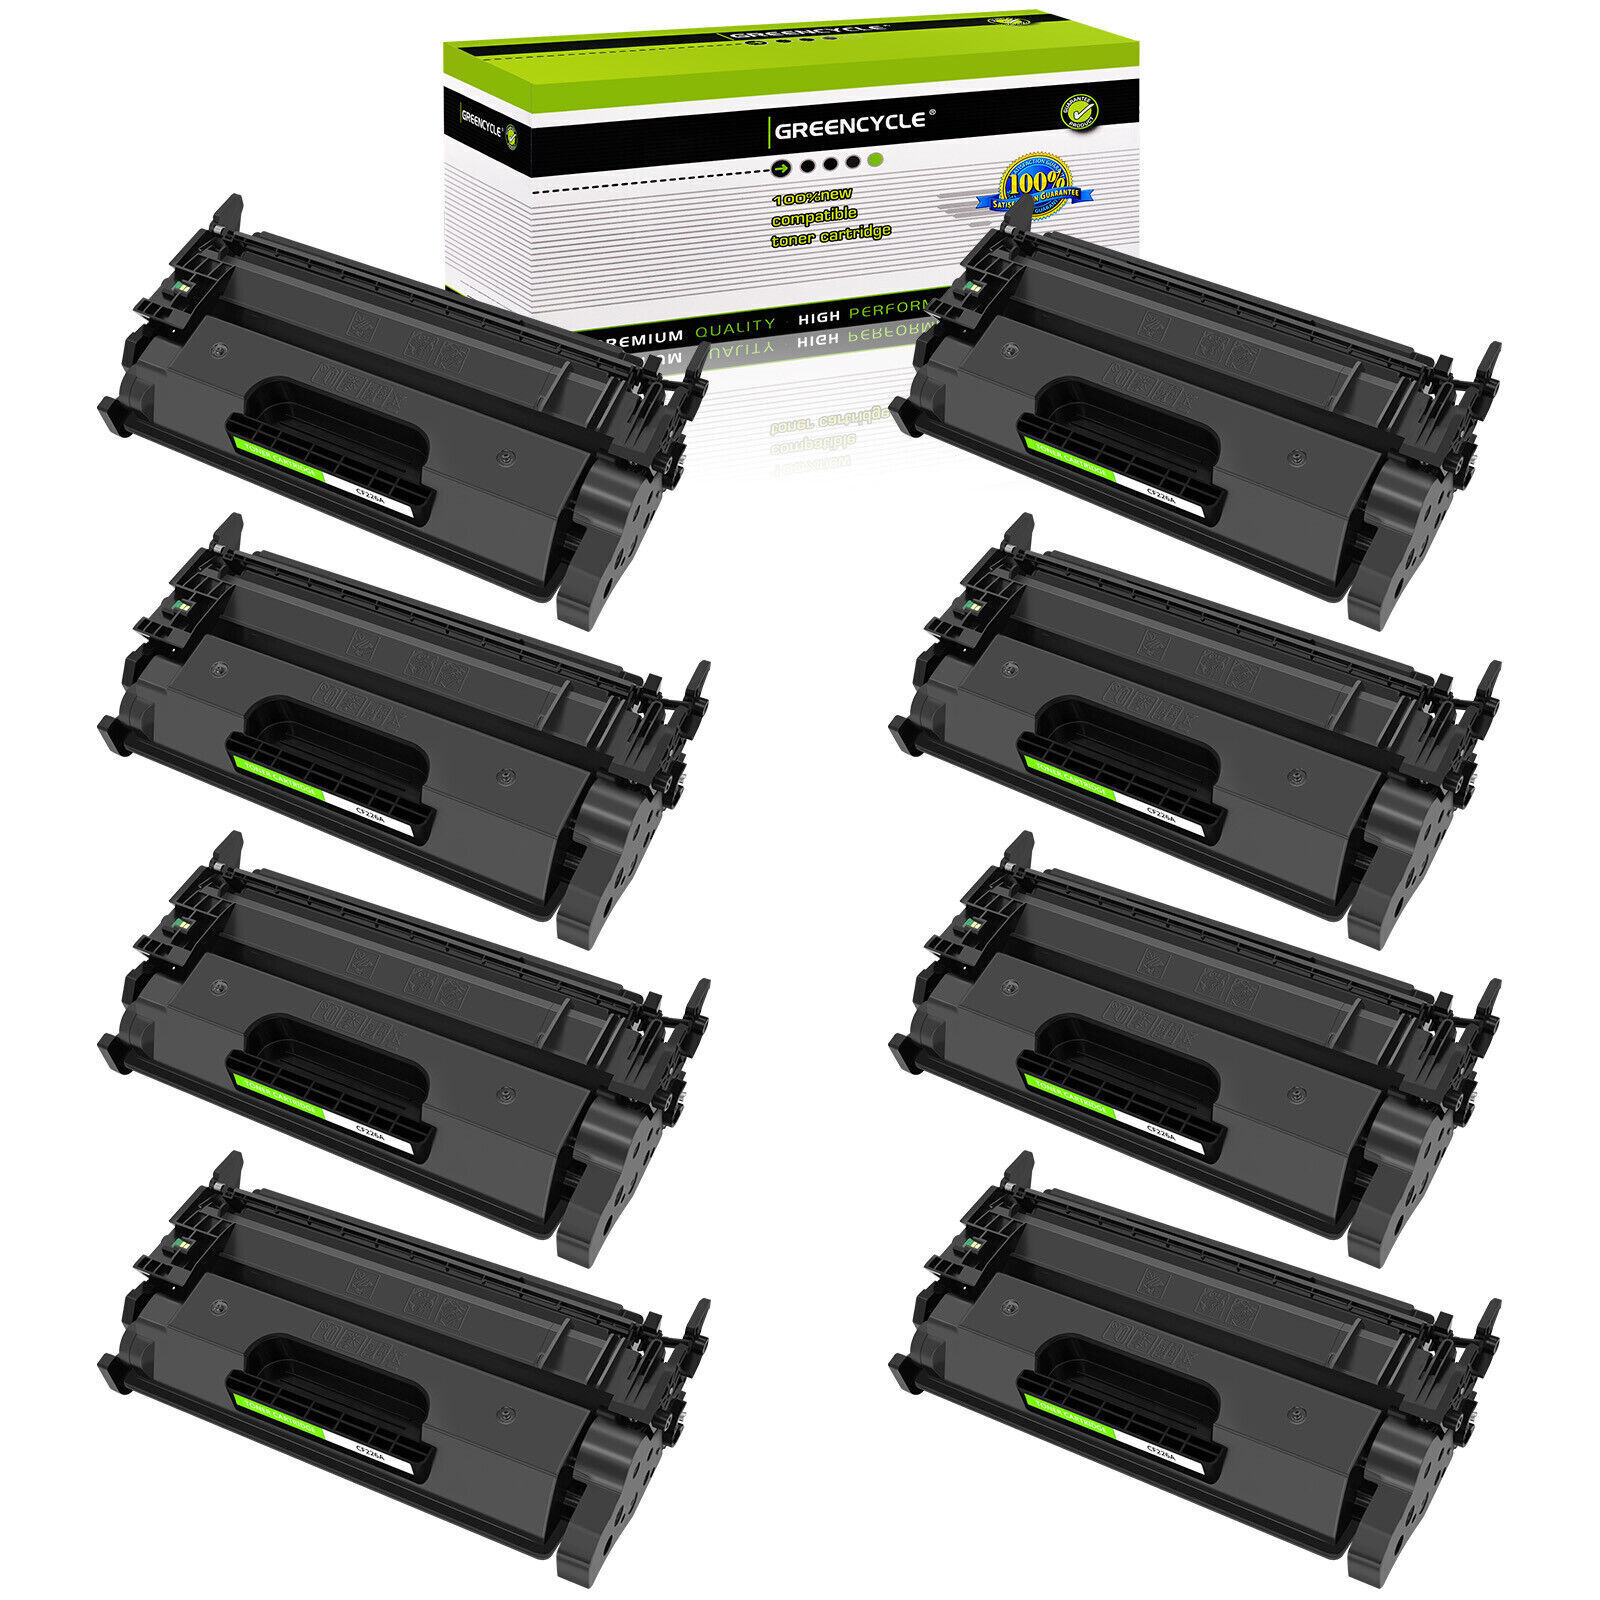 8PK greencycle High Yield CF226A 26A Fits For HP Laserjet Pro M402n MFP M426fdw